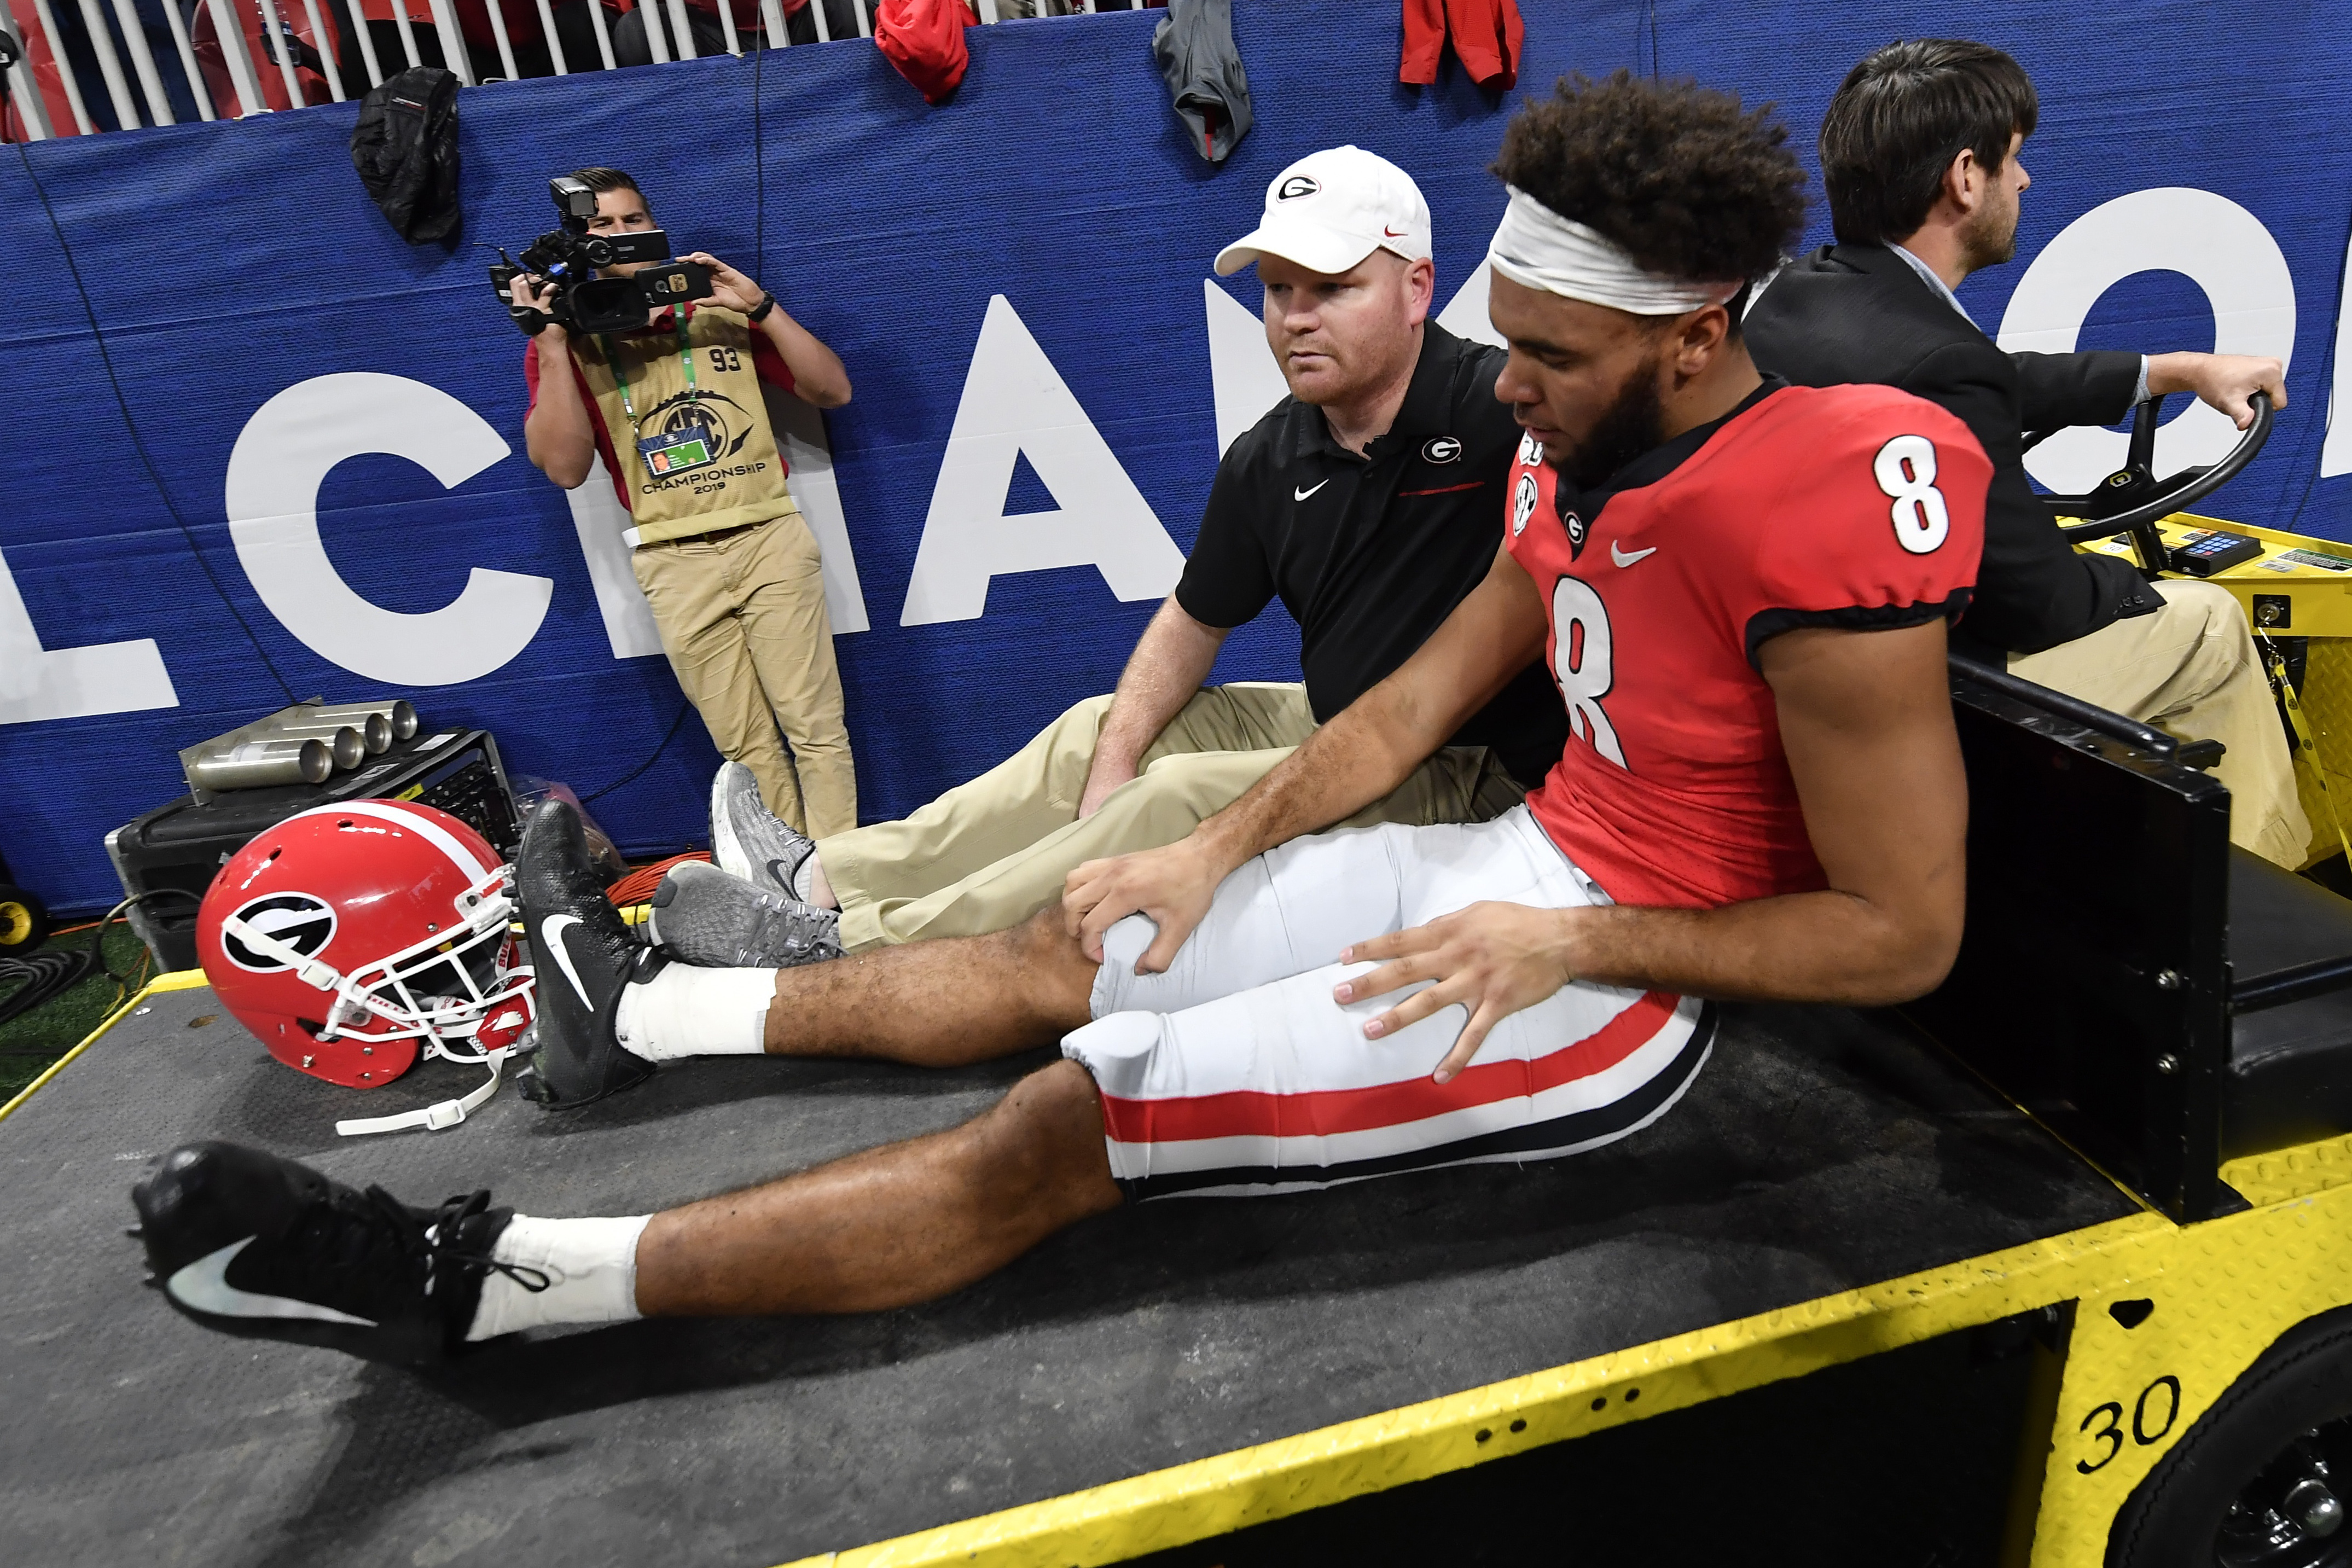 Georgia injuries pile up, Blaylock, Grant out in title game